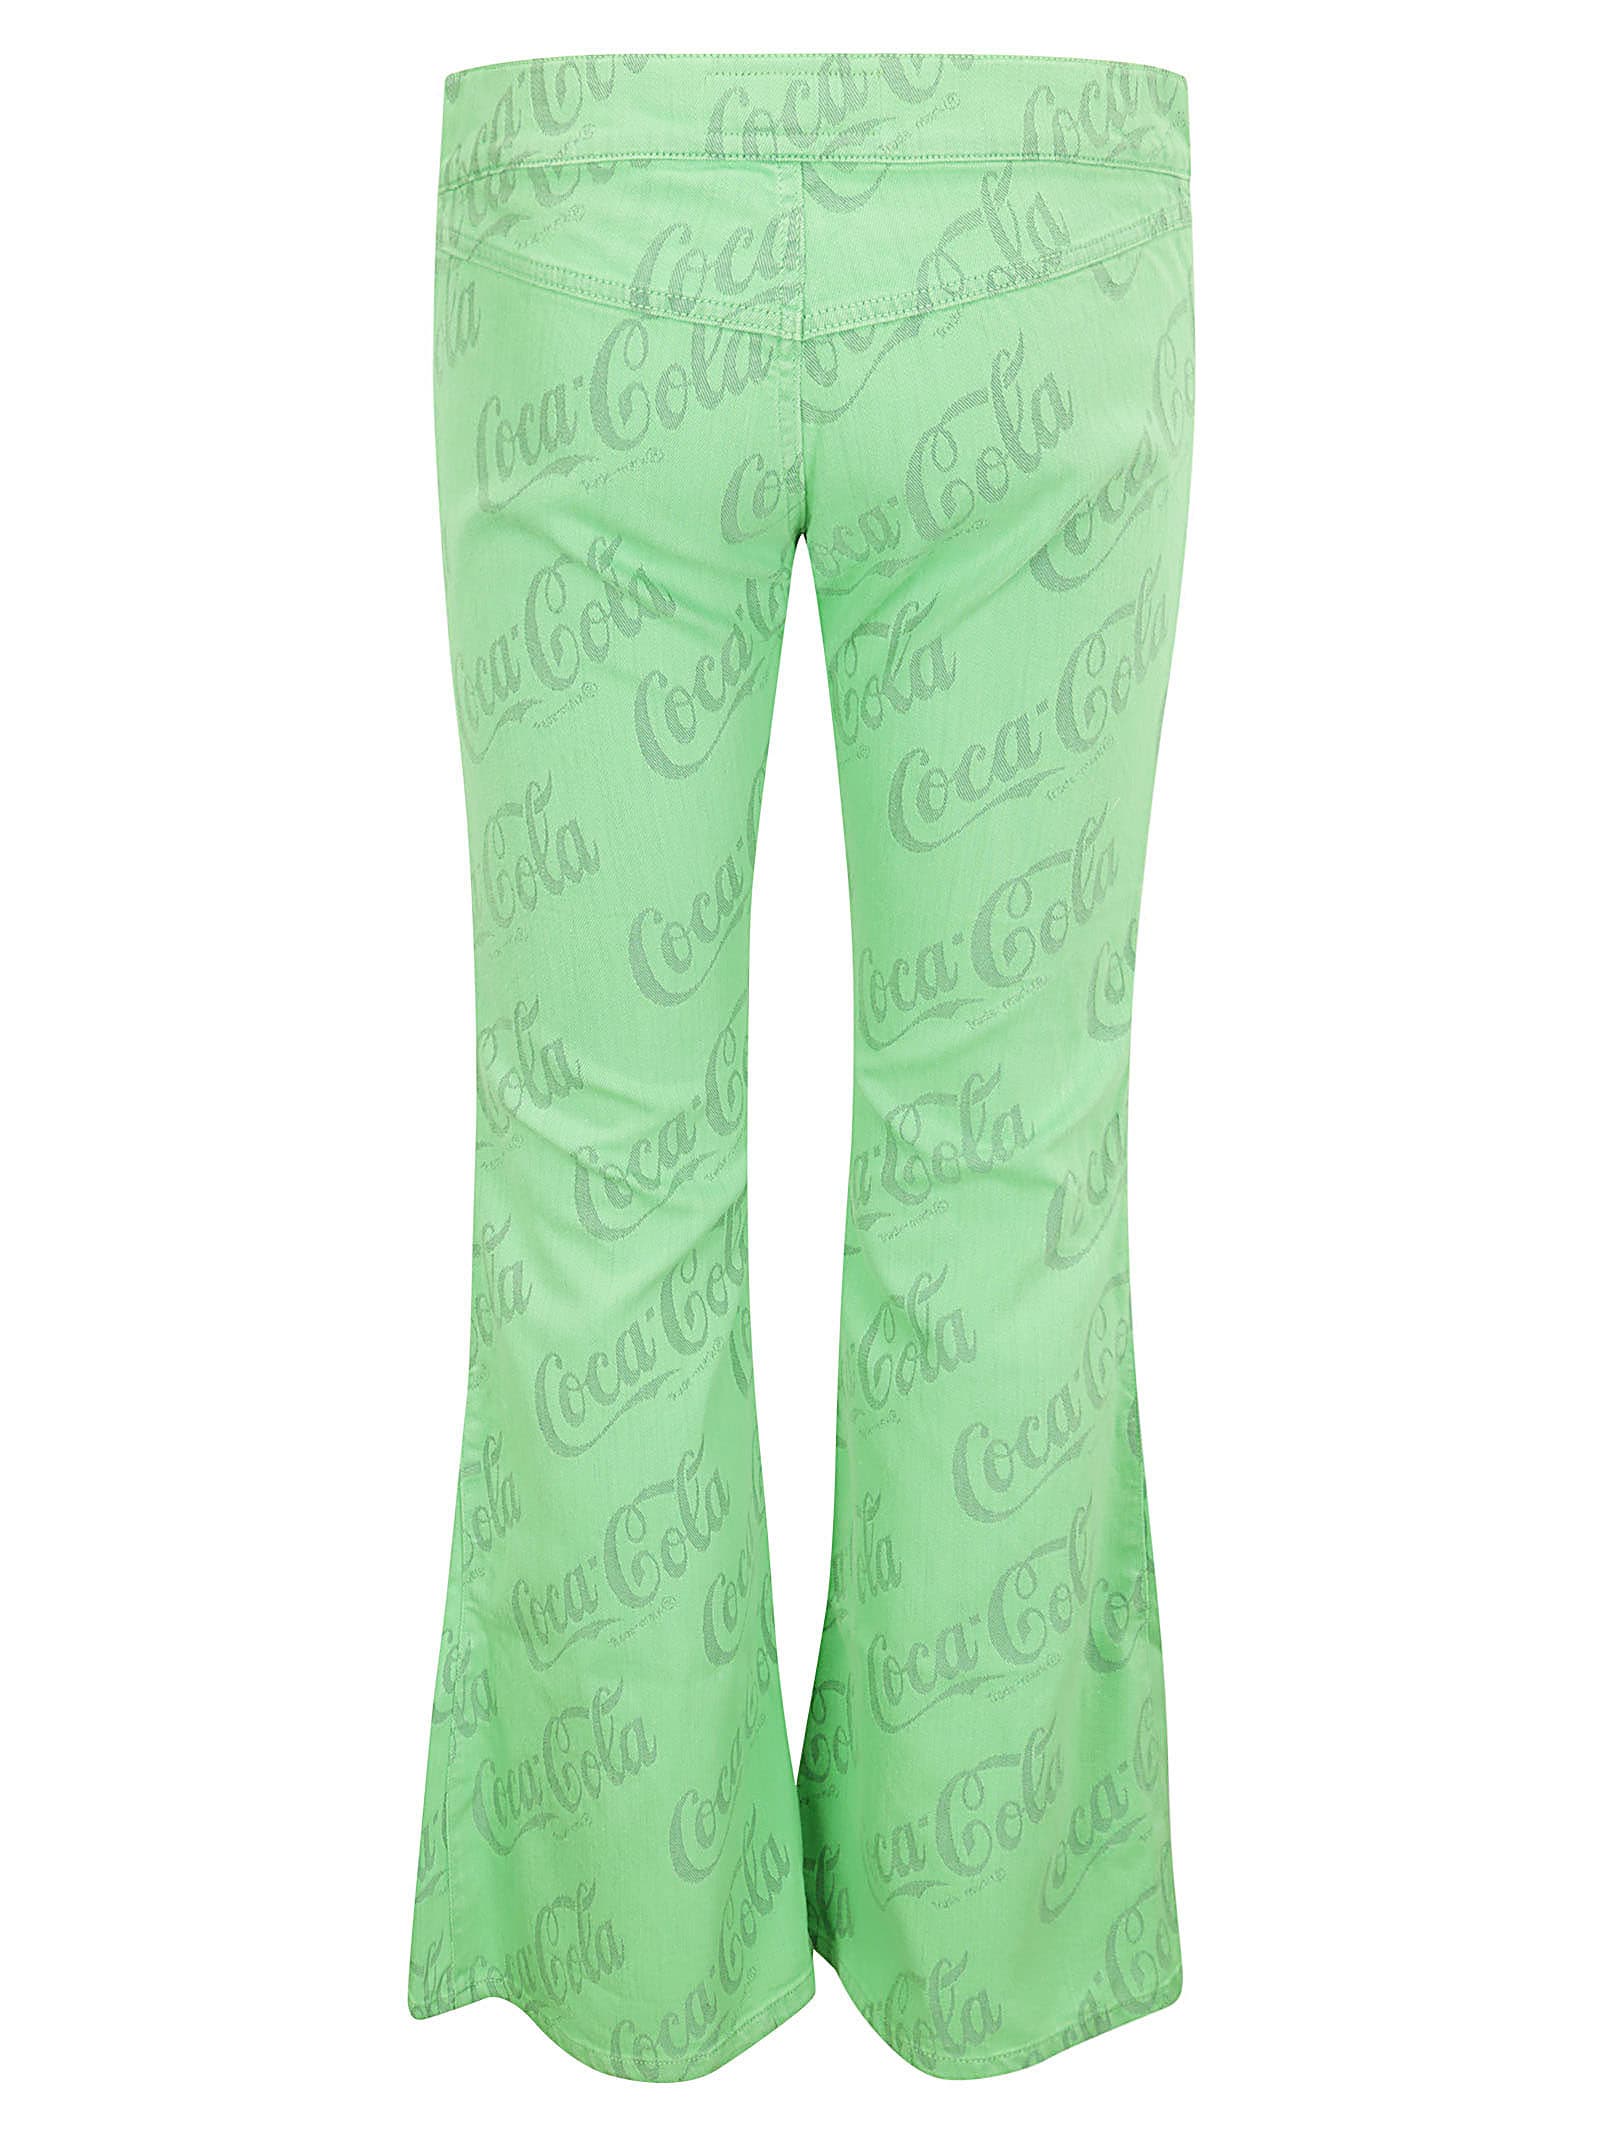 Shop Erl Unisex Jacquard Denim Flare Pants Woven In Green Coca Cola